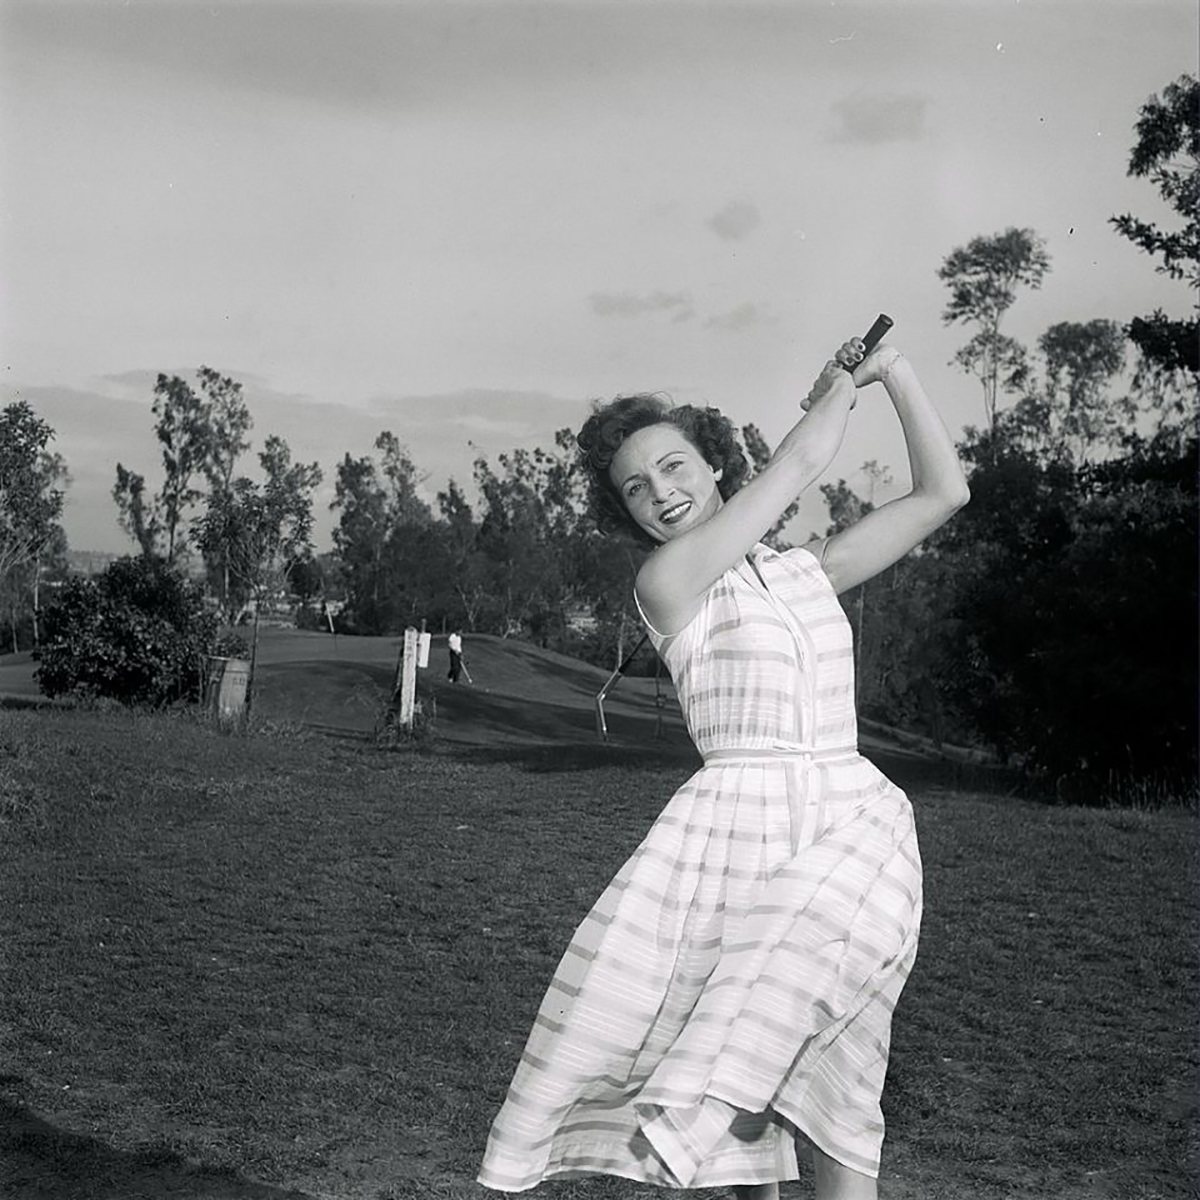 Betty White playing golf in the 1950s.